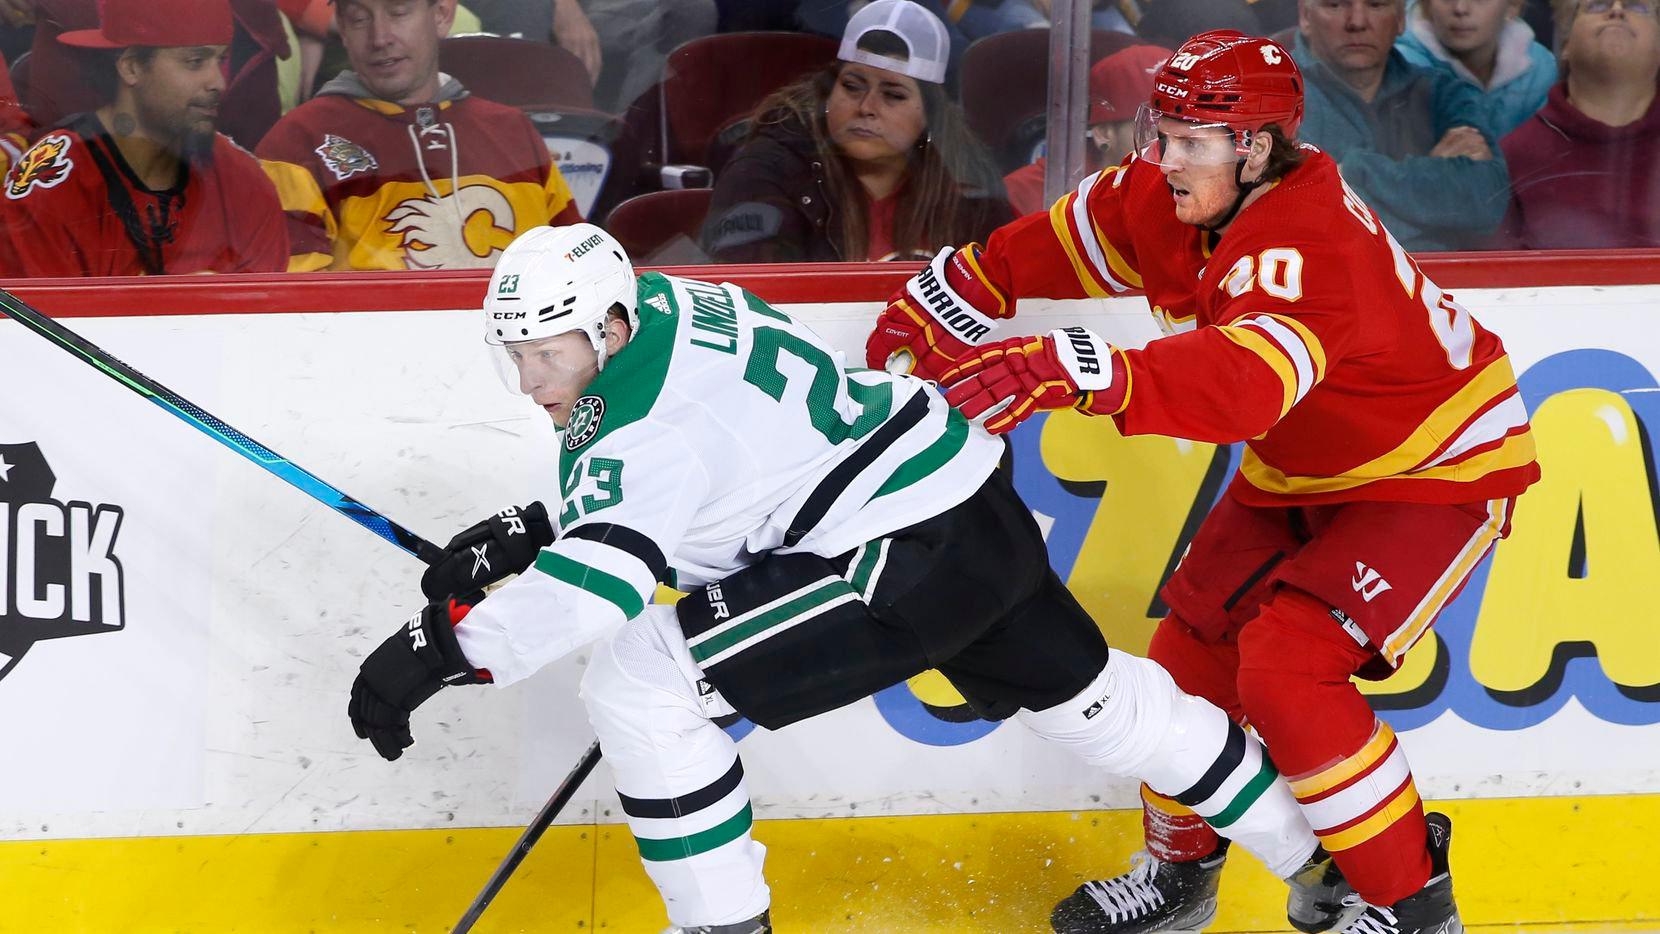 Calgary Flames vs. Dallas Stars Series Betting Preview: Flames to overwhelm Stars in short series